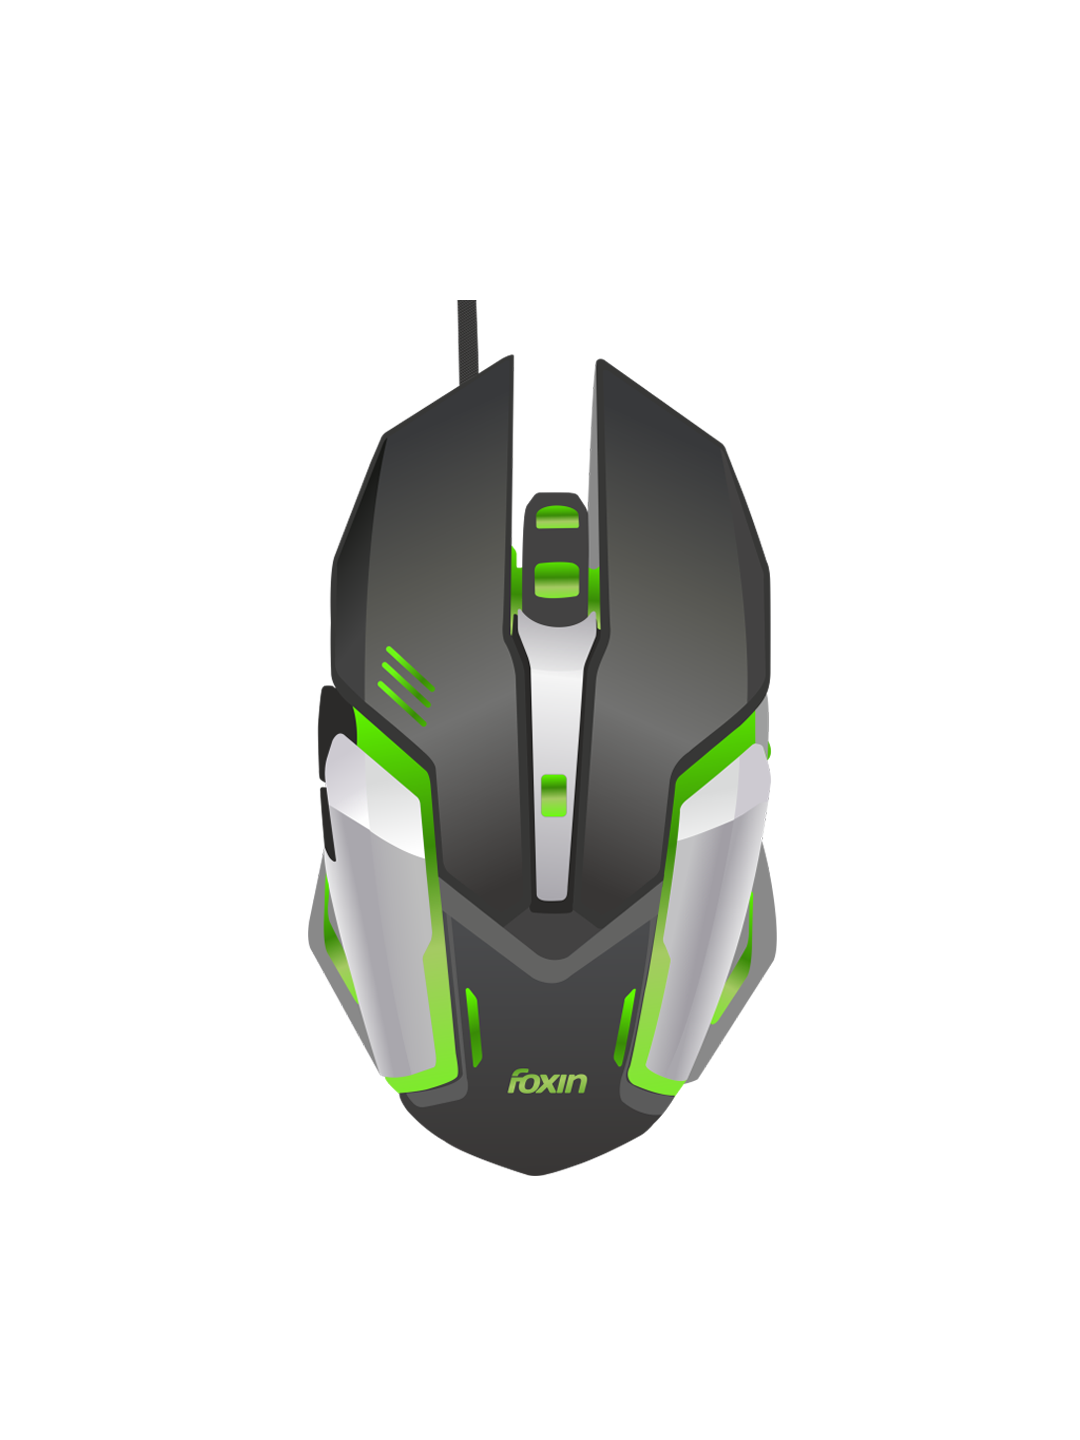 Foxin FGM-601 Wired Optical Gaming Mouse 